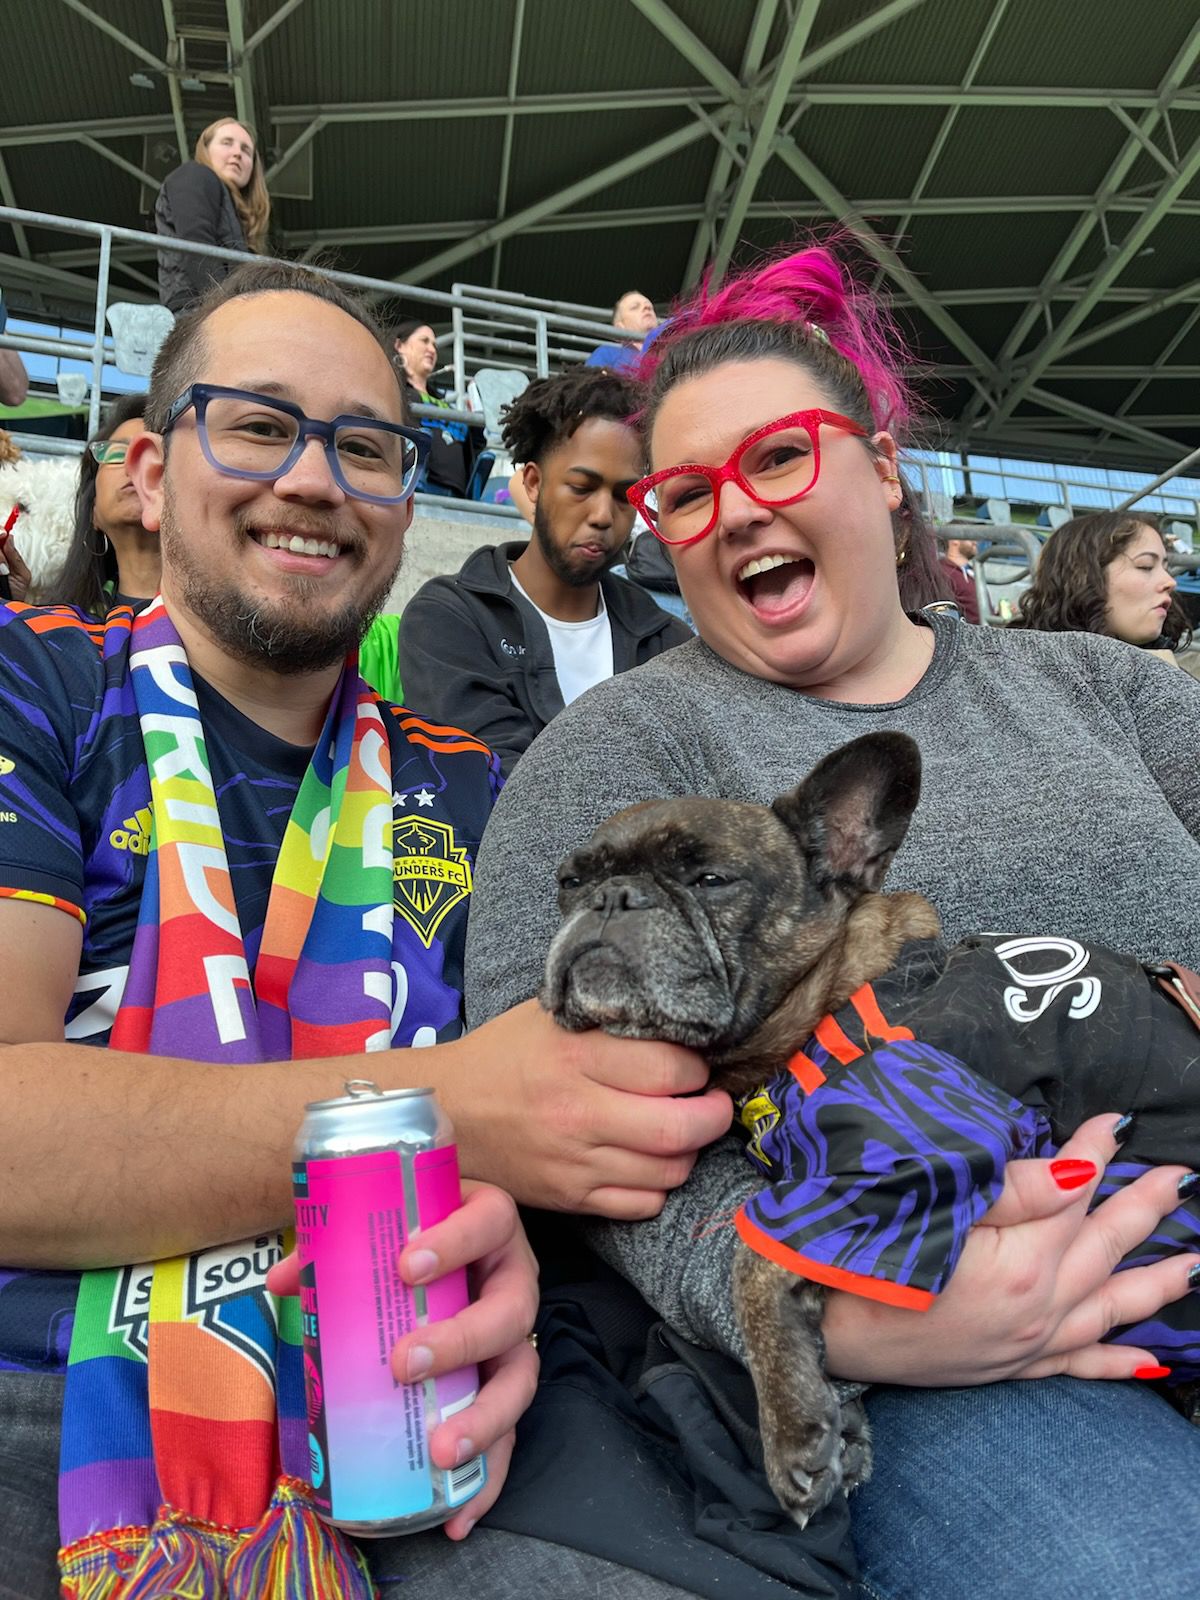 Kaitlin and Andrew Tingkang (the author and wife) with Sophie the french bulldog sitting in Kaitlin’s lap as Andrew scratches her chin. Andrew and Sophie are wearing matching Jimi Hendrix Sounders kits. Sophie’s were hand-made by her owner!